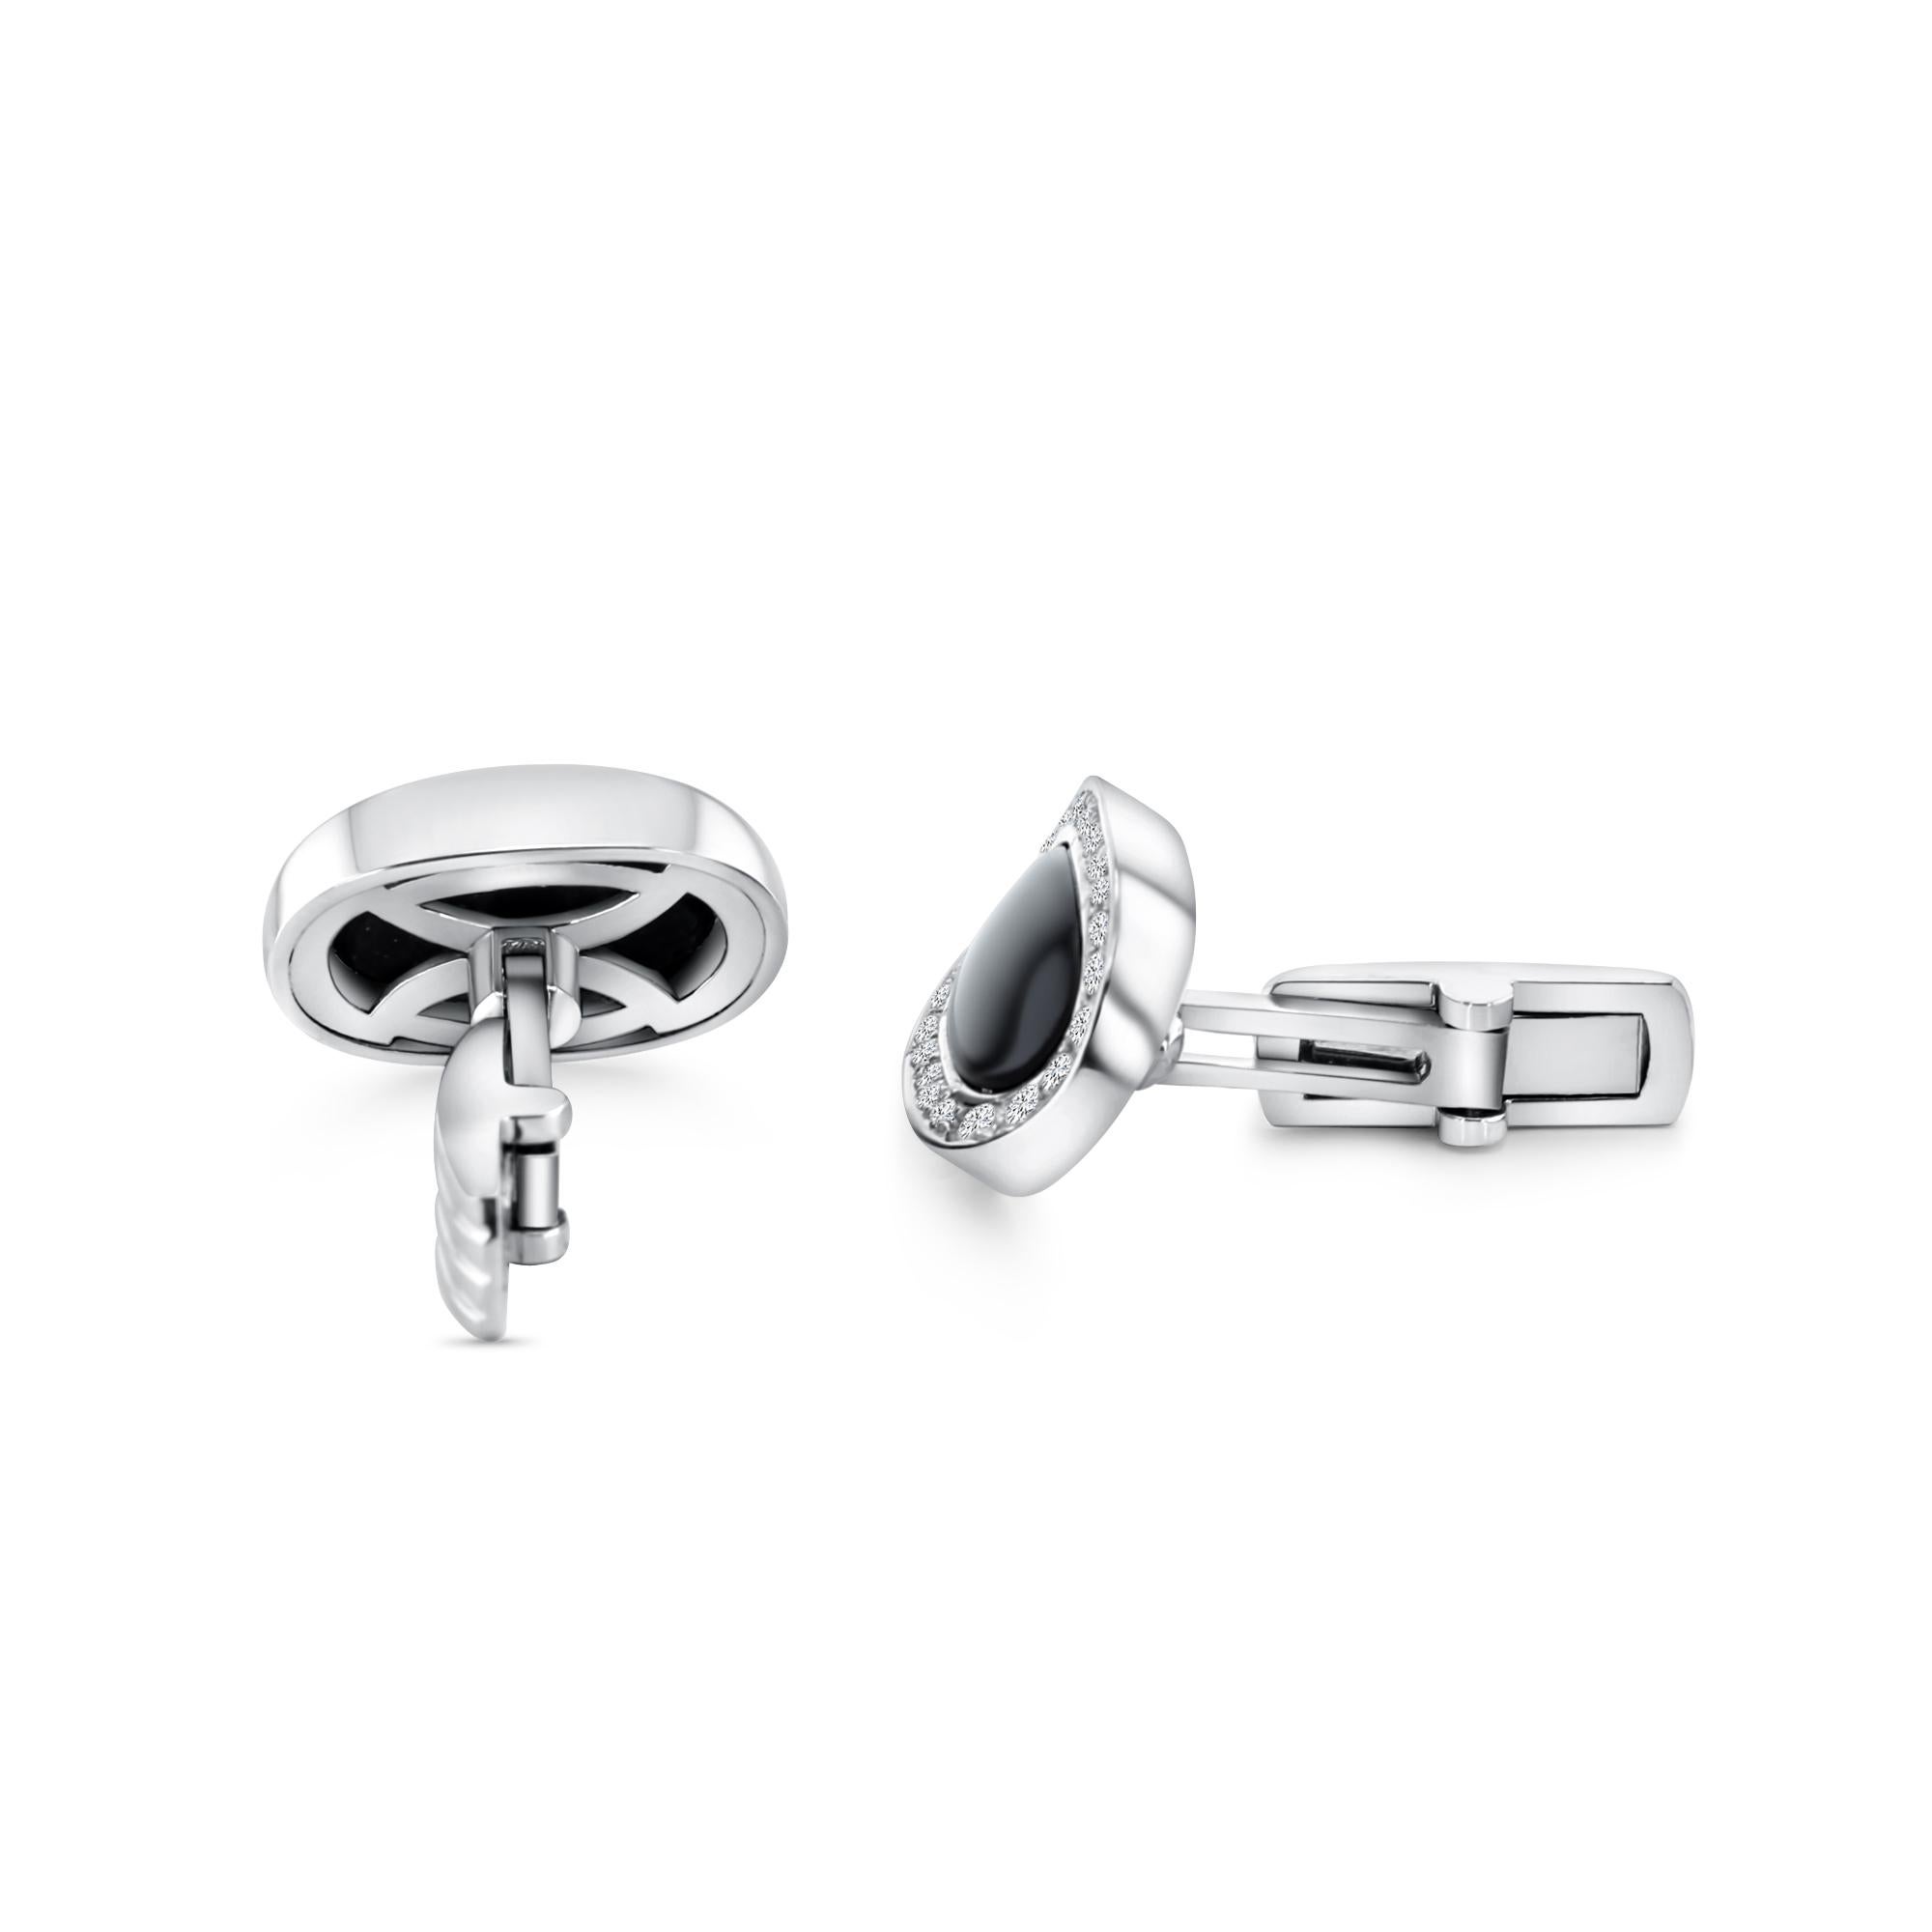 Oval Onyx Diamond Halo Cuff Links 14k White Gold

Unleash the charm of our Oval Onyx Diamond Halo Cuff Links, elegantly designed in 14k White Gold. These cuff links showcase a mesmerizing oval-shaped Onyx gemstone surrounded by a an array of